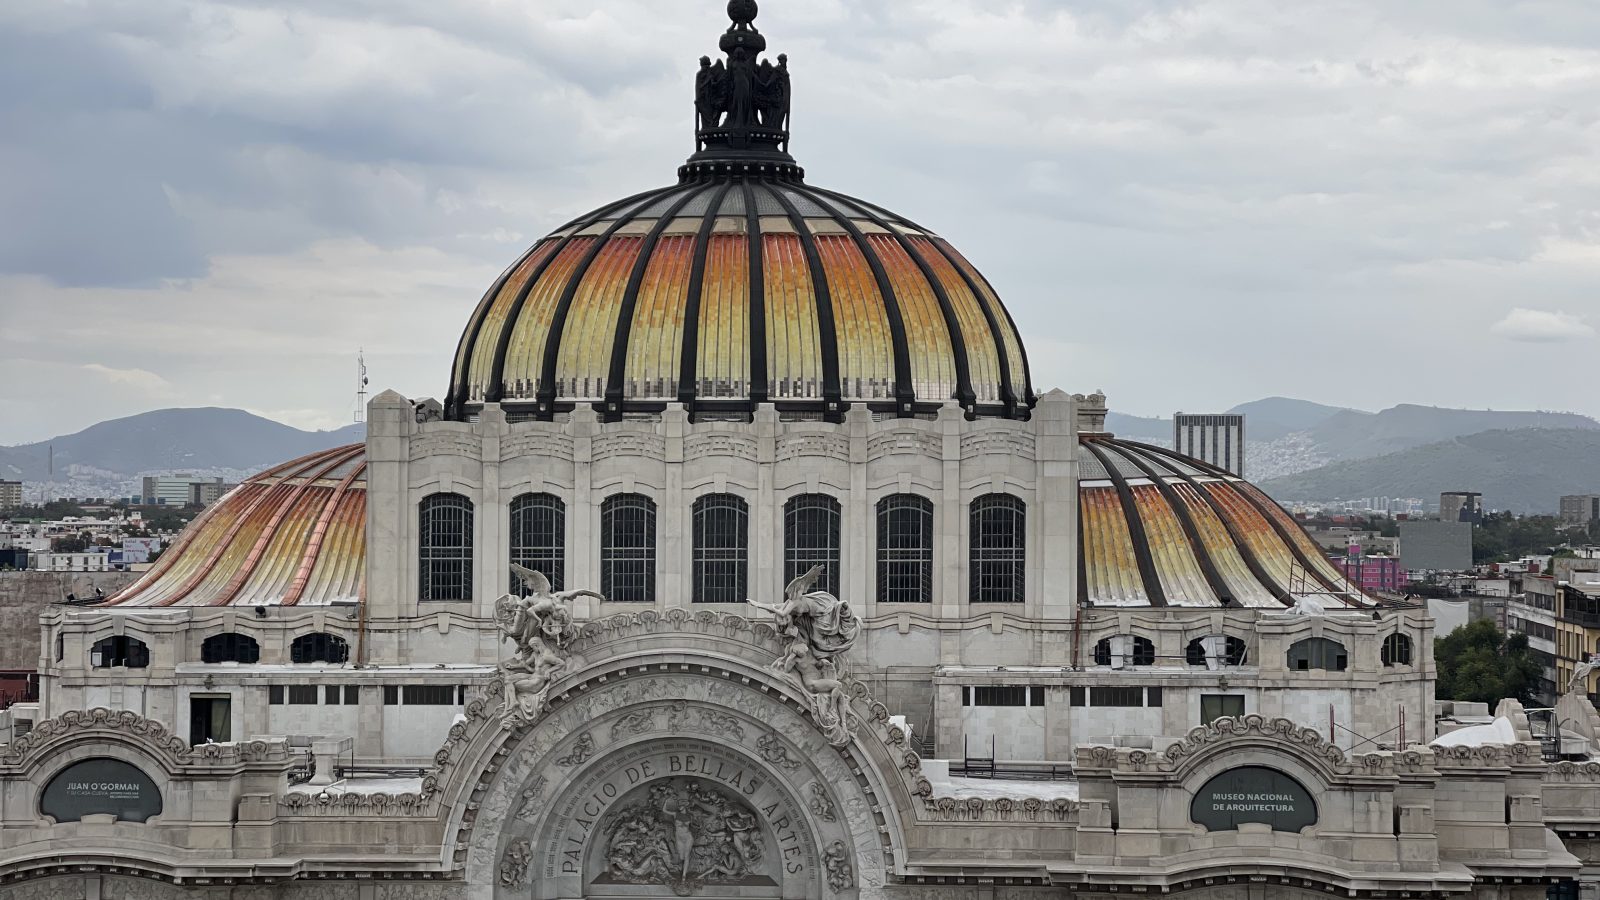 Trip Recap: Here’s How Our Family of Three Spent A Week in Mexico City